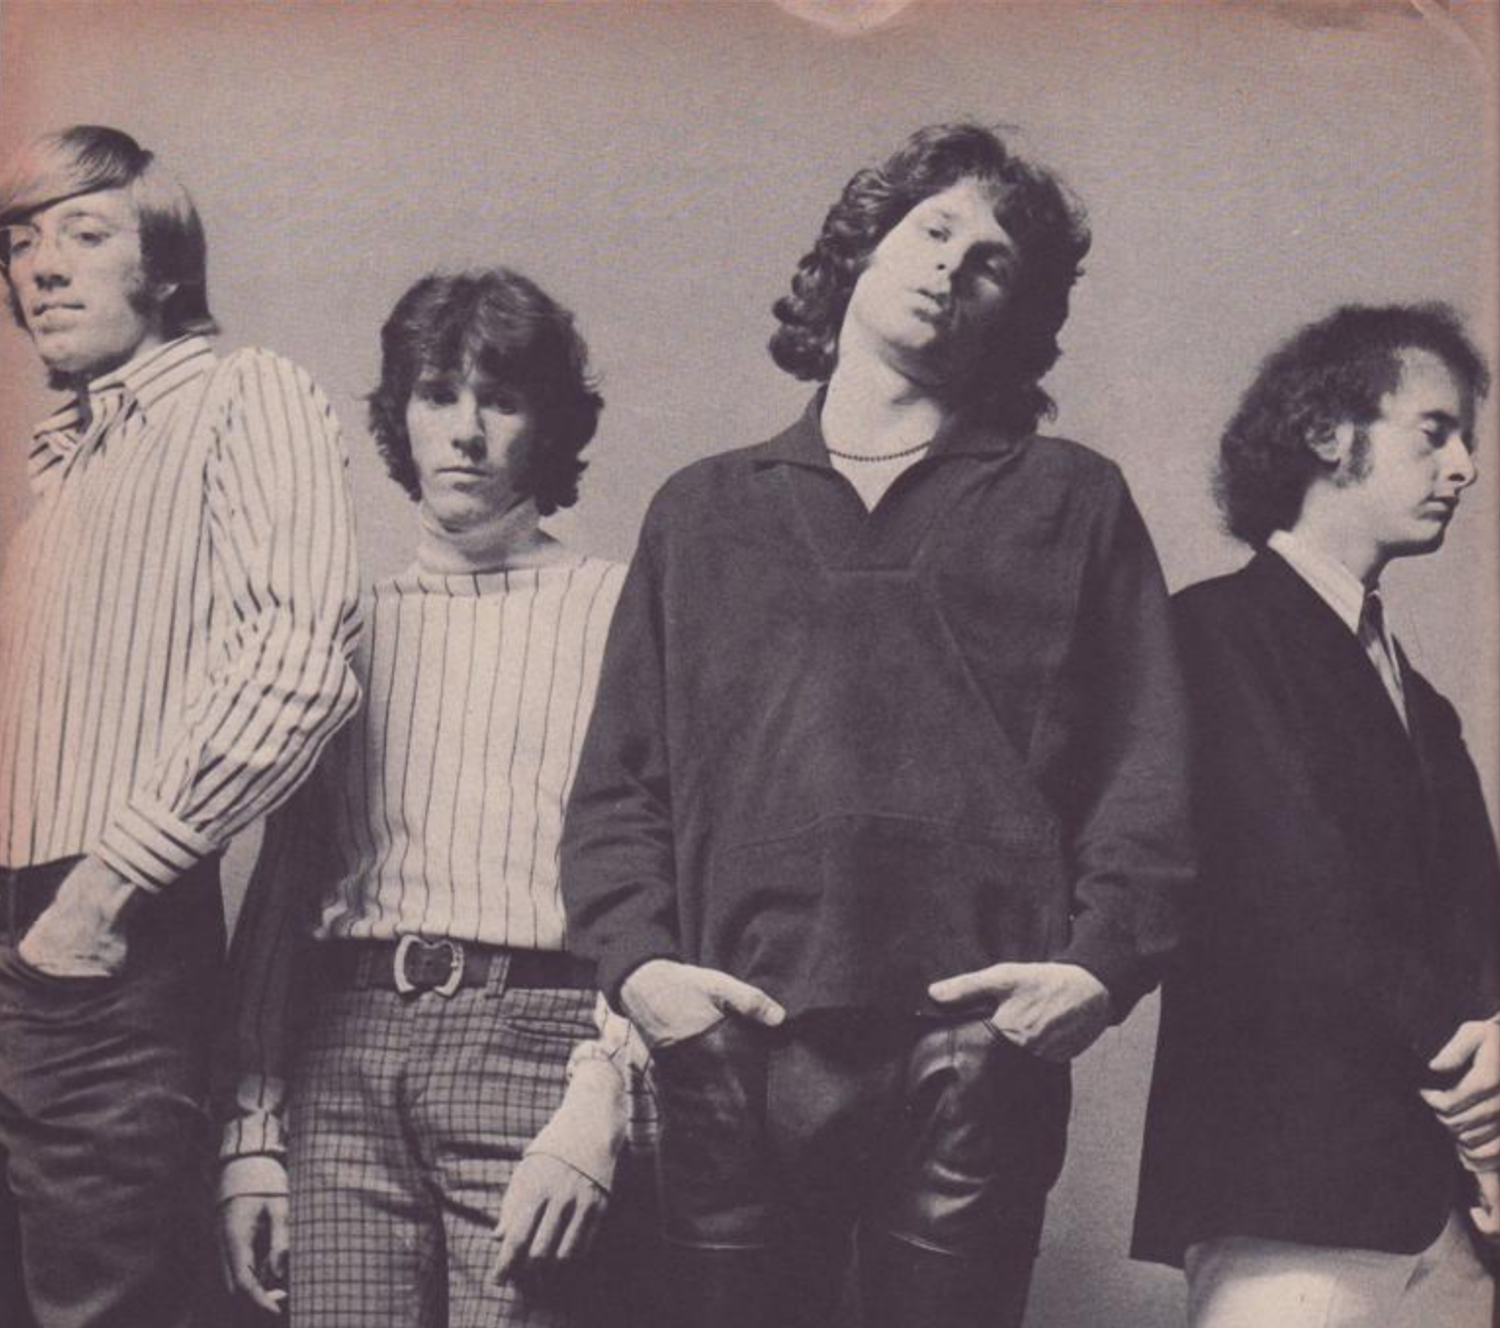 The Doors Invade San Francisco: The Human Be-In Kicks Off the Summer of  Love — Bob Batchelor